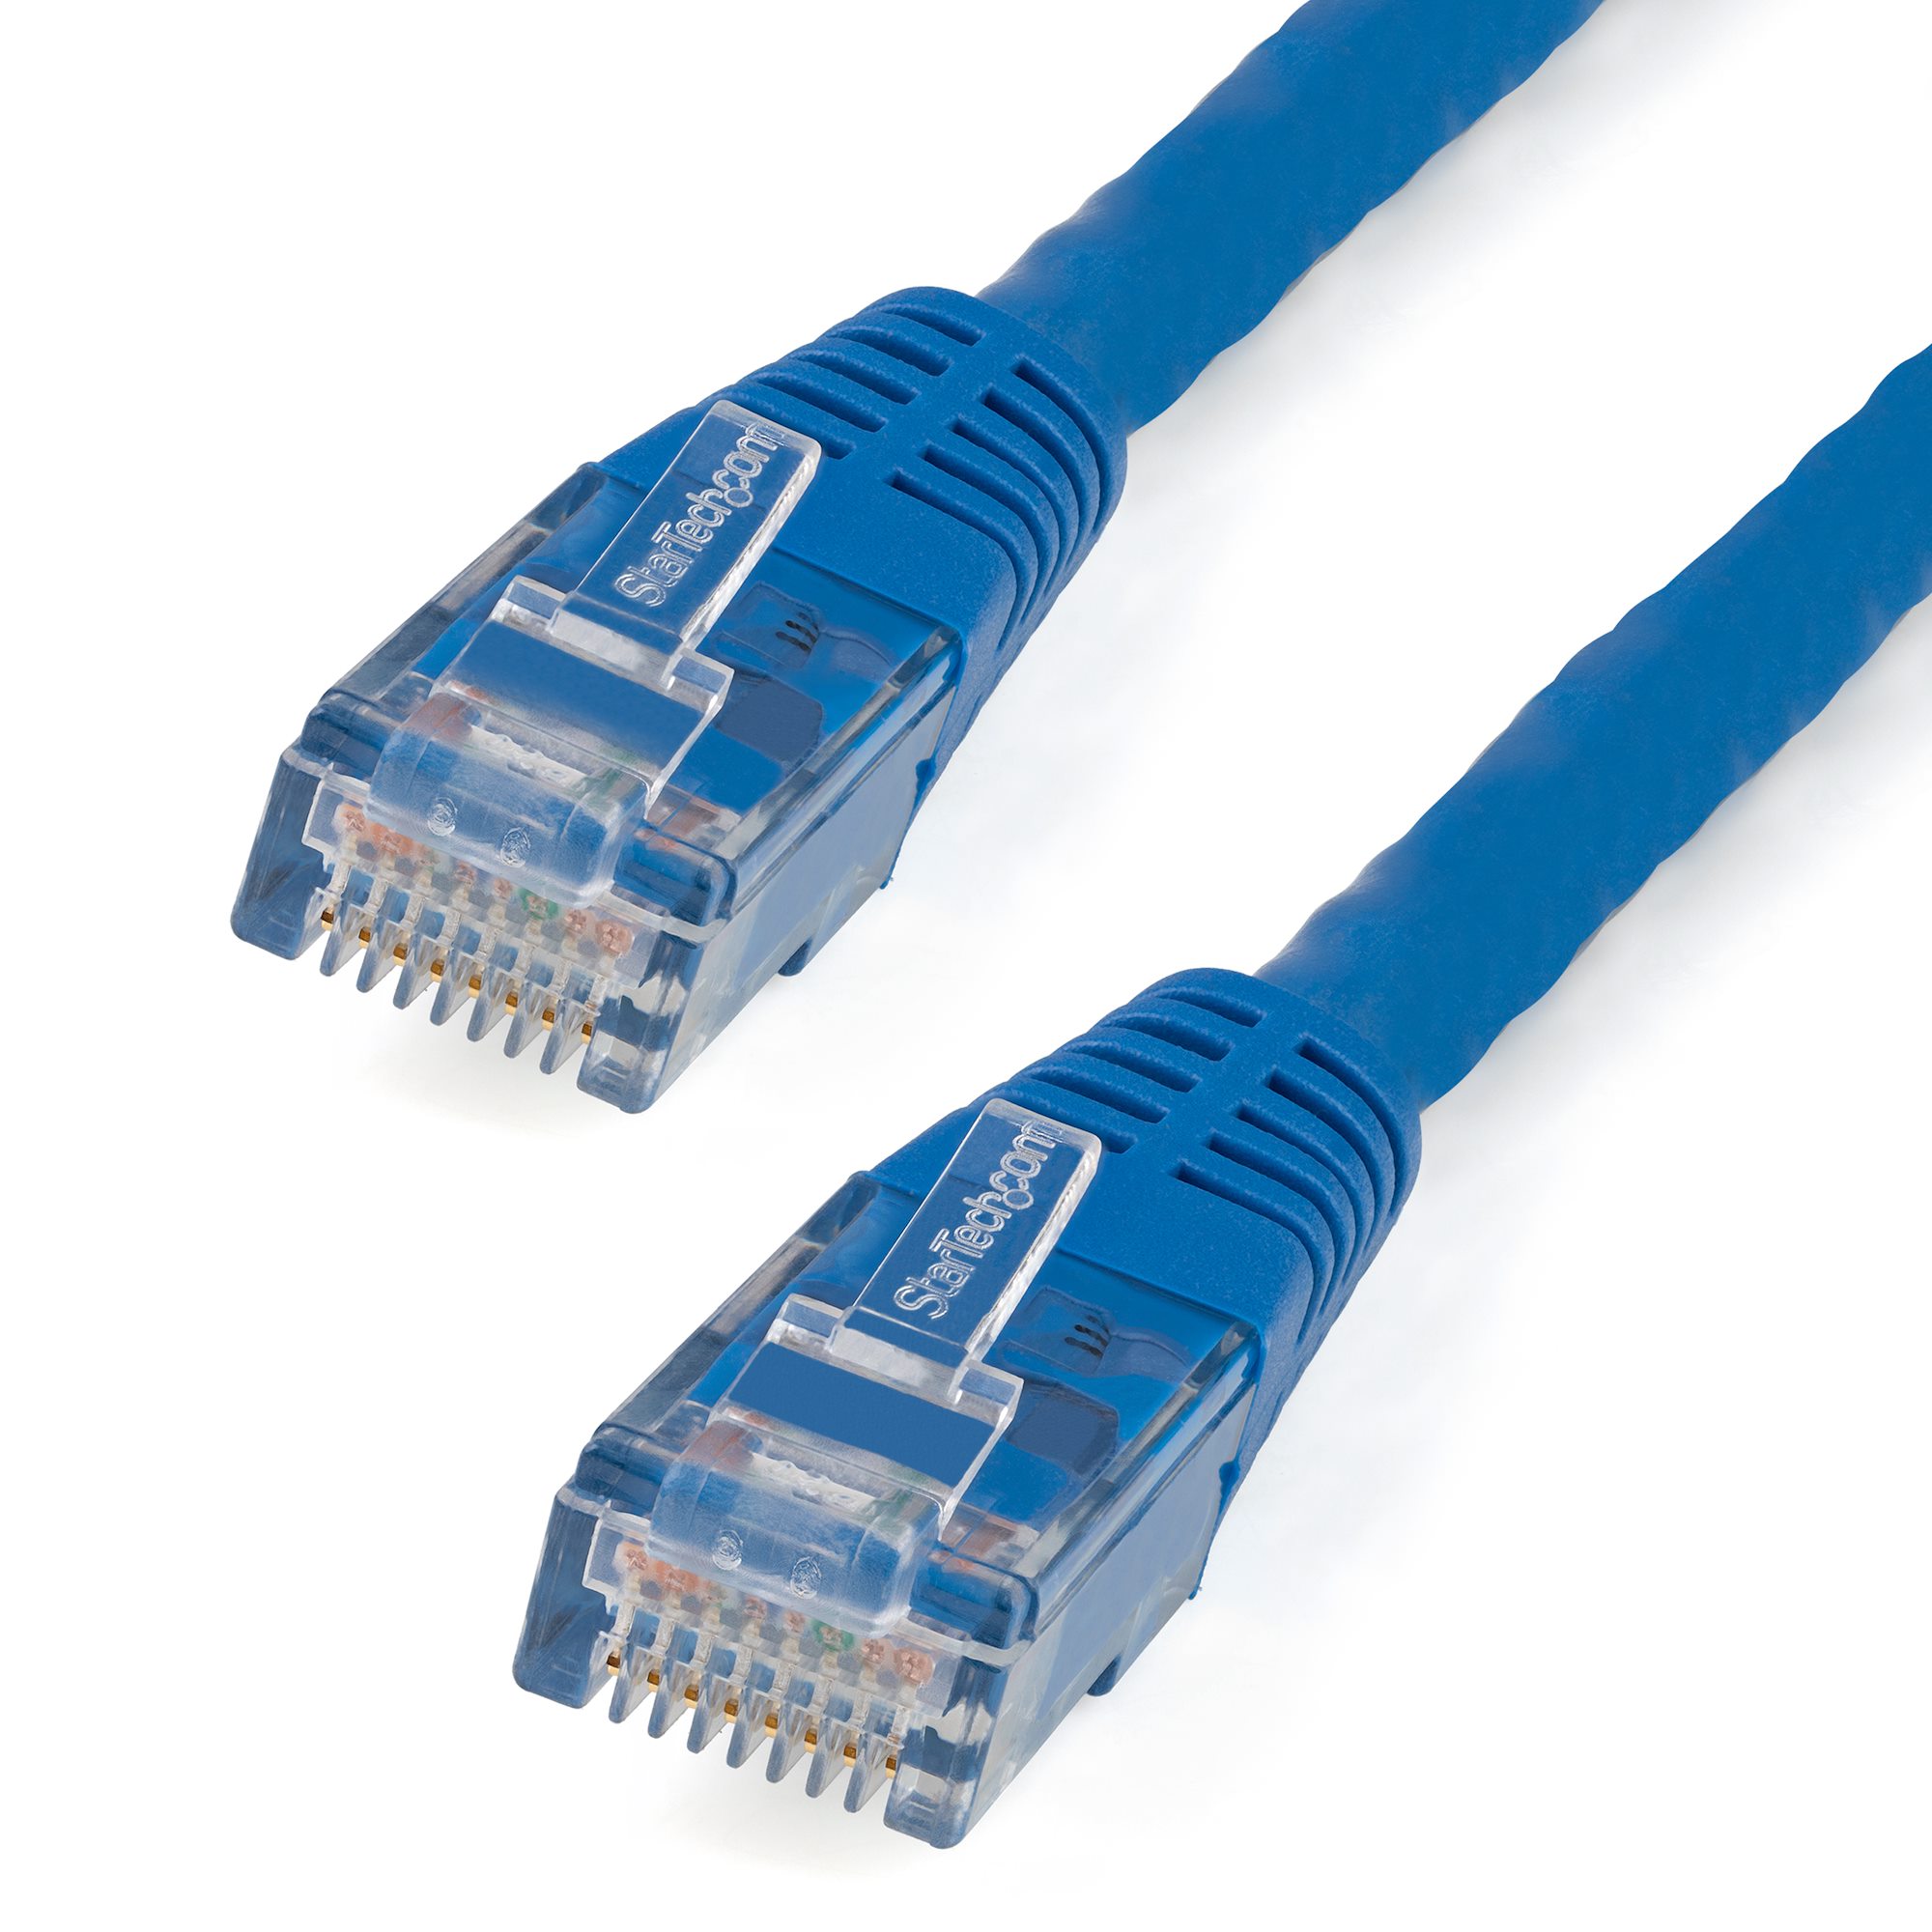 StarTech.com 50 ft. 15.2 m Ethernet Network Cable - Snagless N6PATCH50BL Cat6 Cable Blue Power Over Ethernet